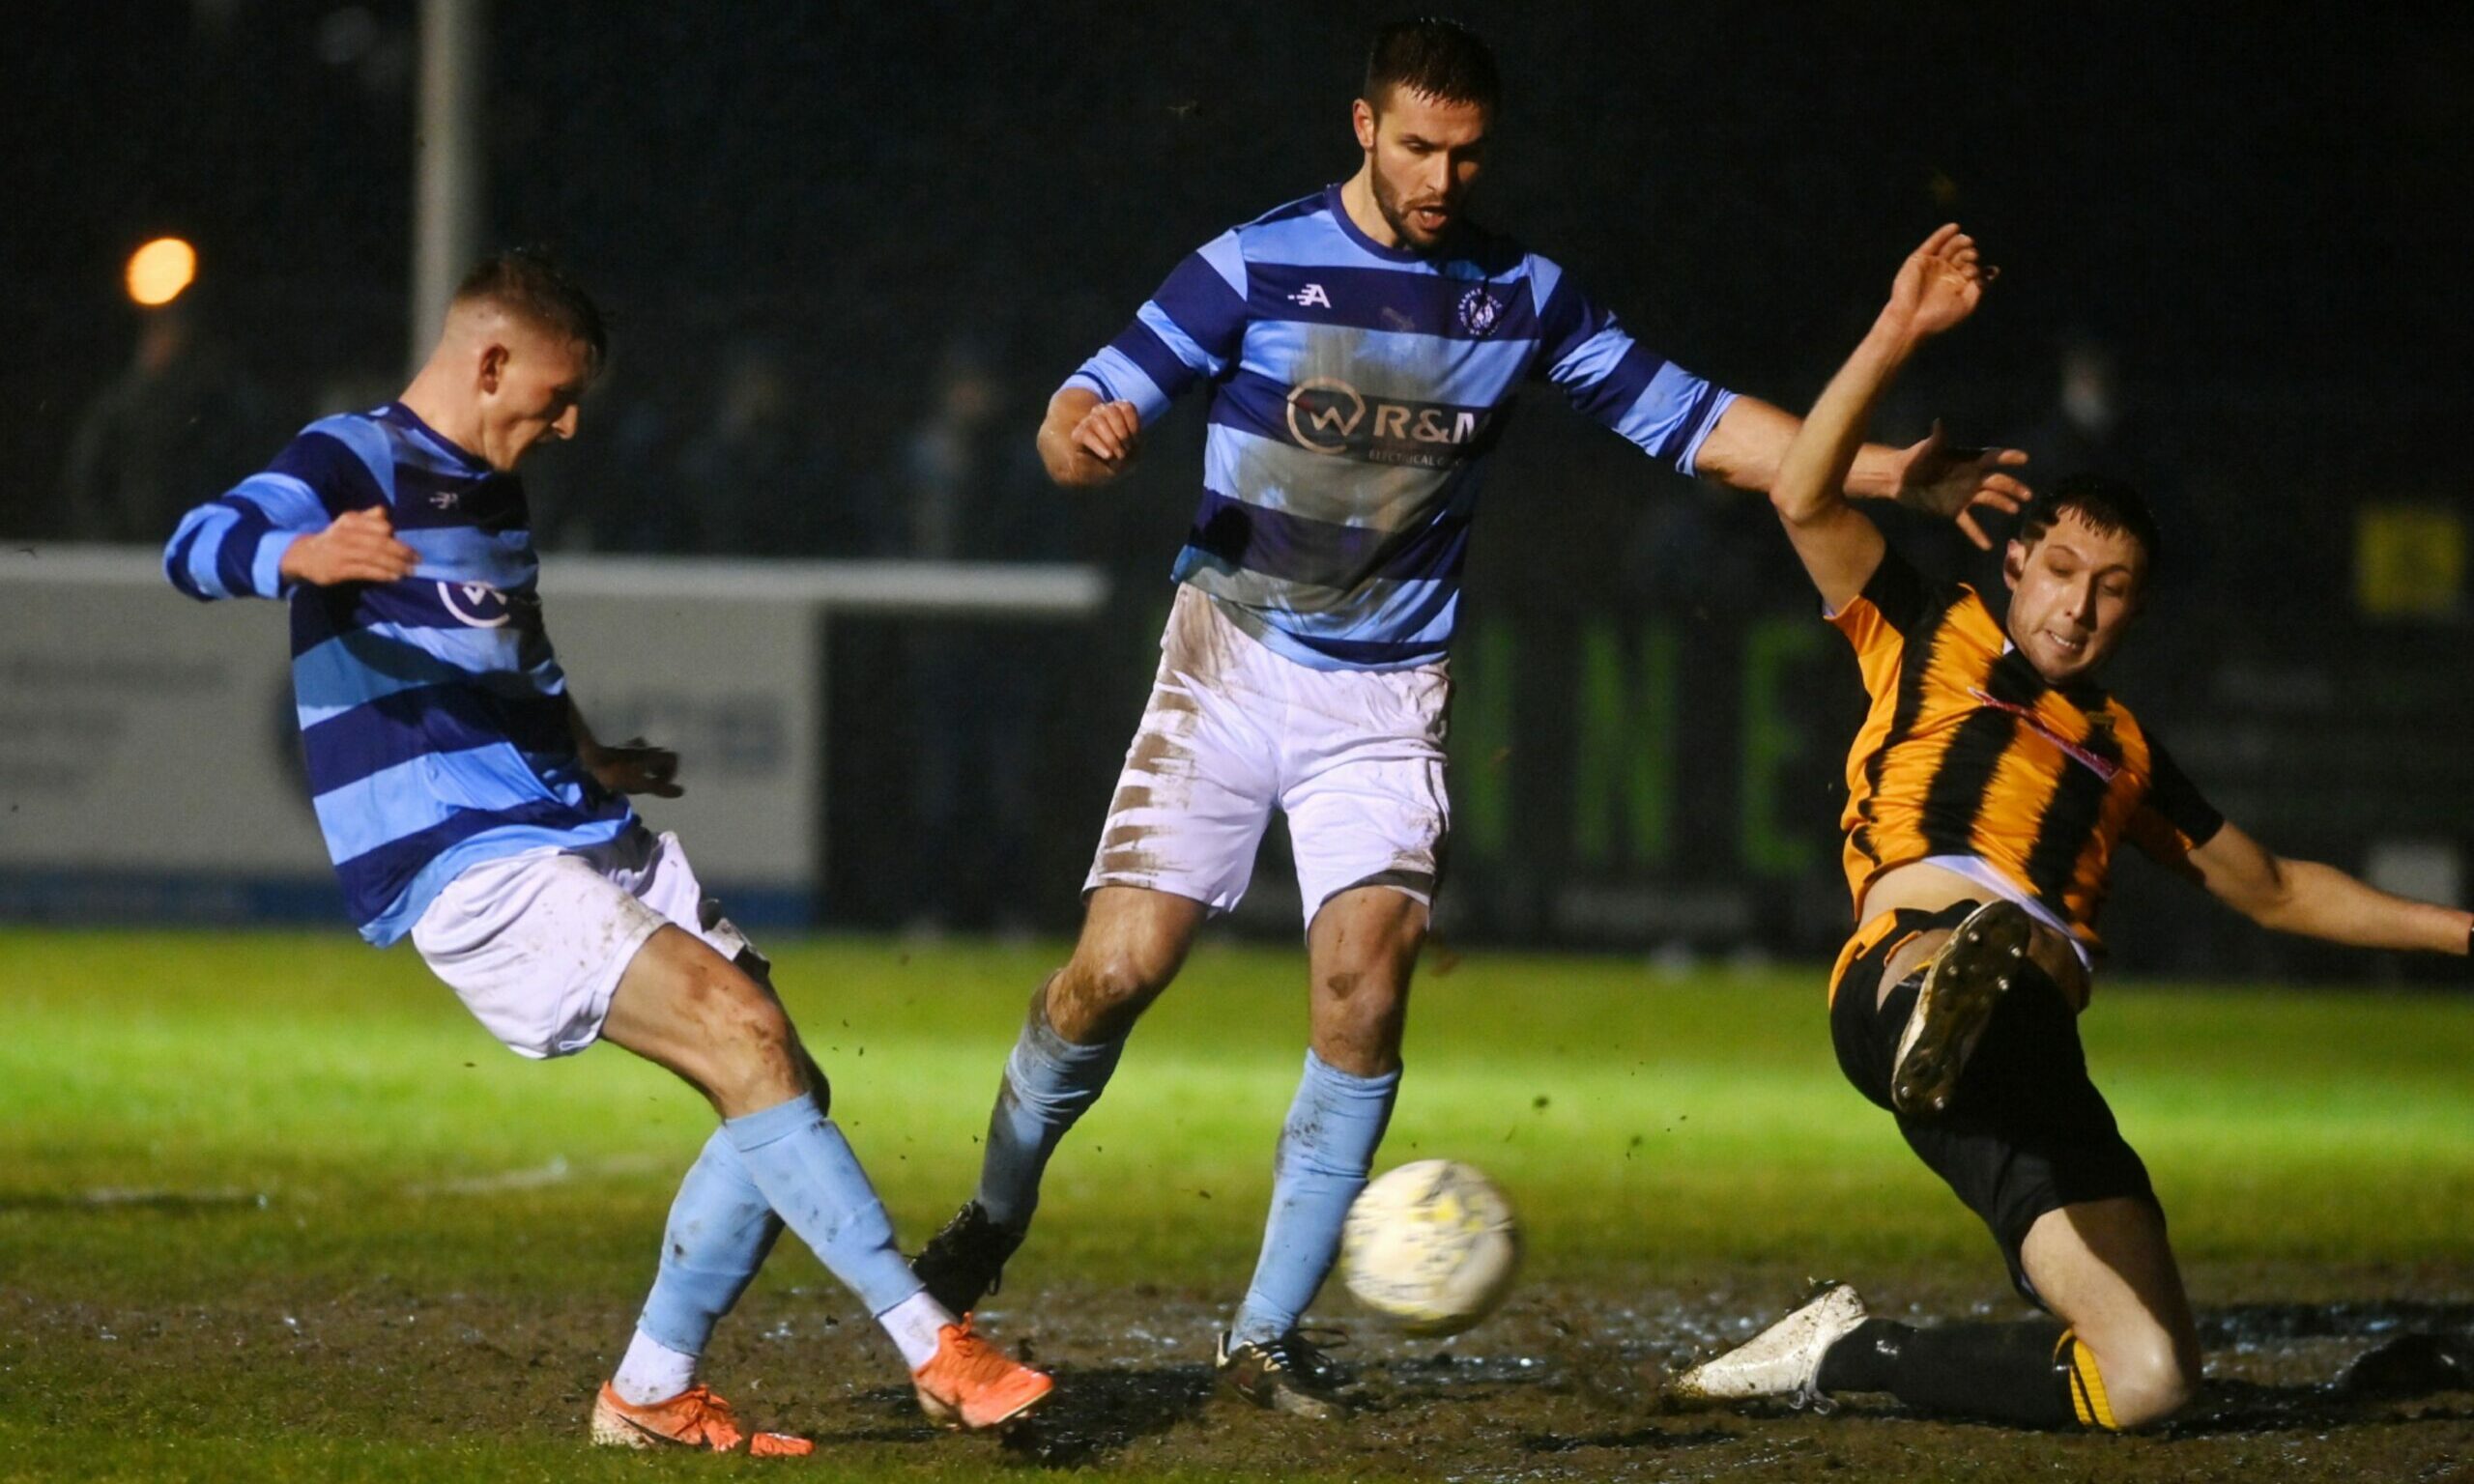 Lewis Crosbie, left, of Banks o' Dee is denied by Michael Clark of Huntly, right